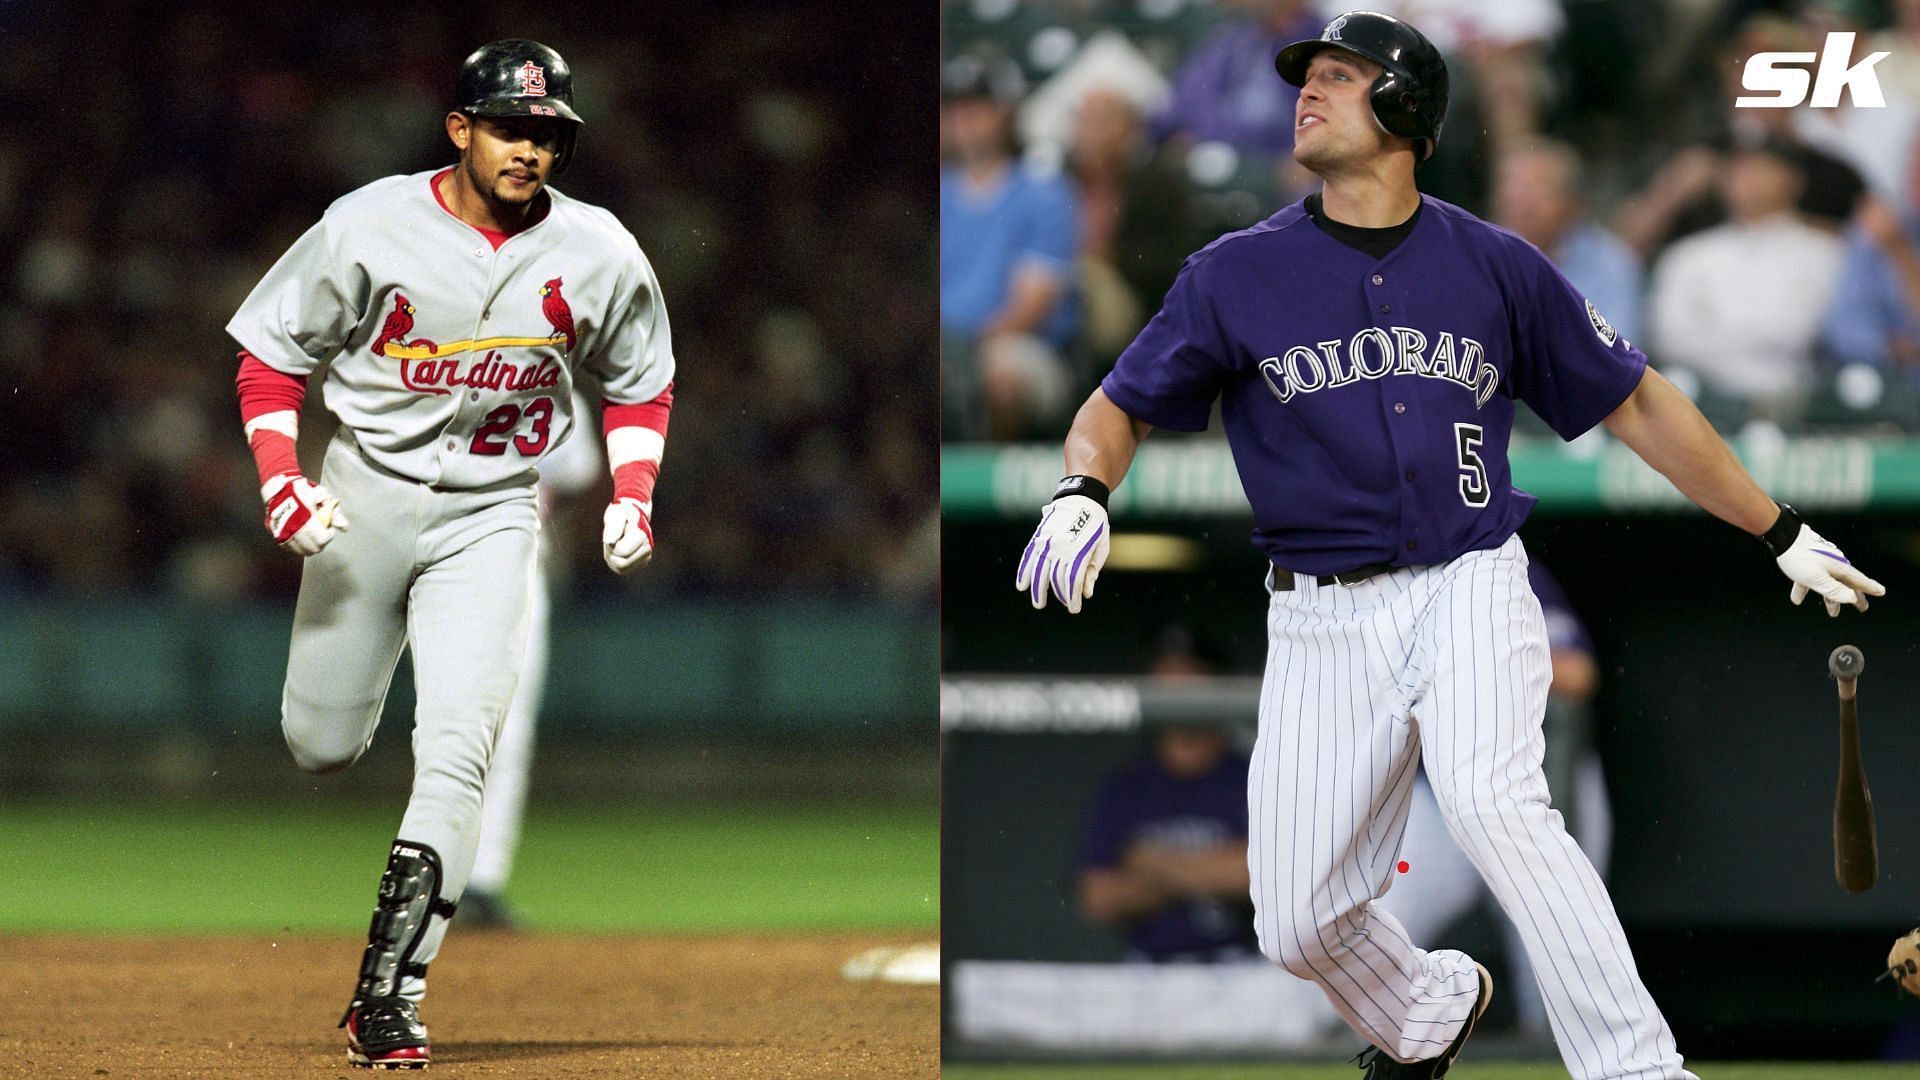 Matt Holliday and Fernando Tatis Sr. are two players who saw their sons go on to play in the MLB